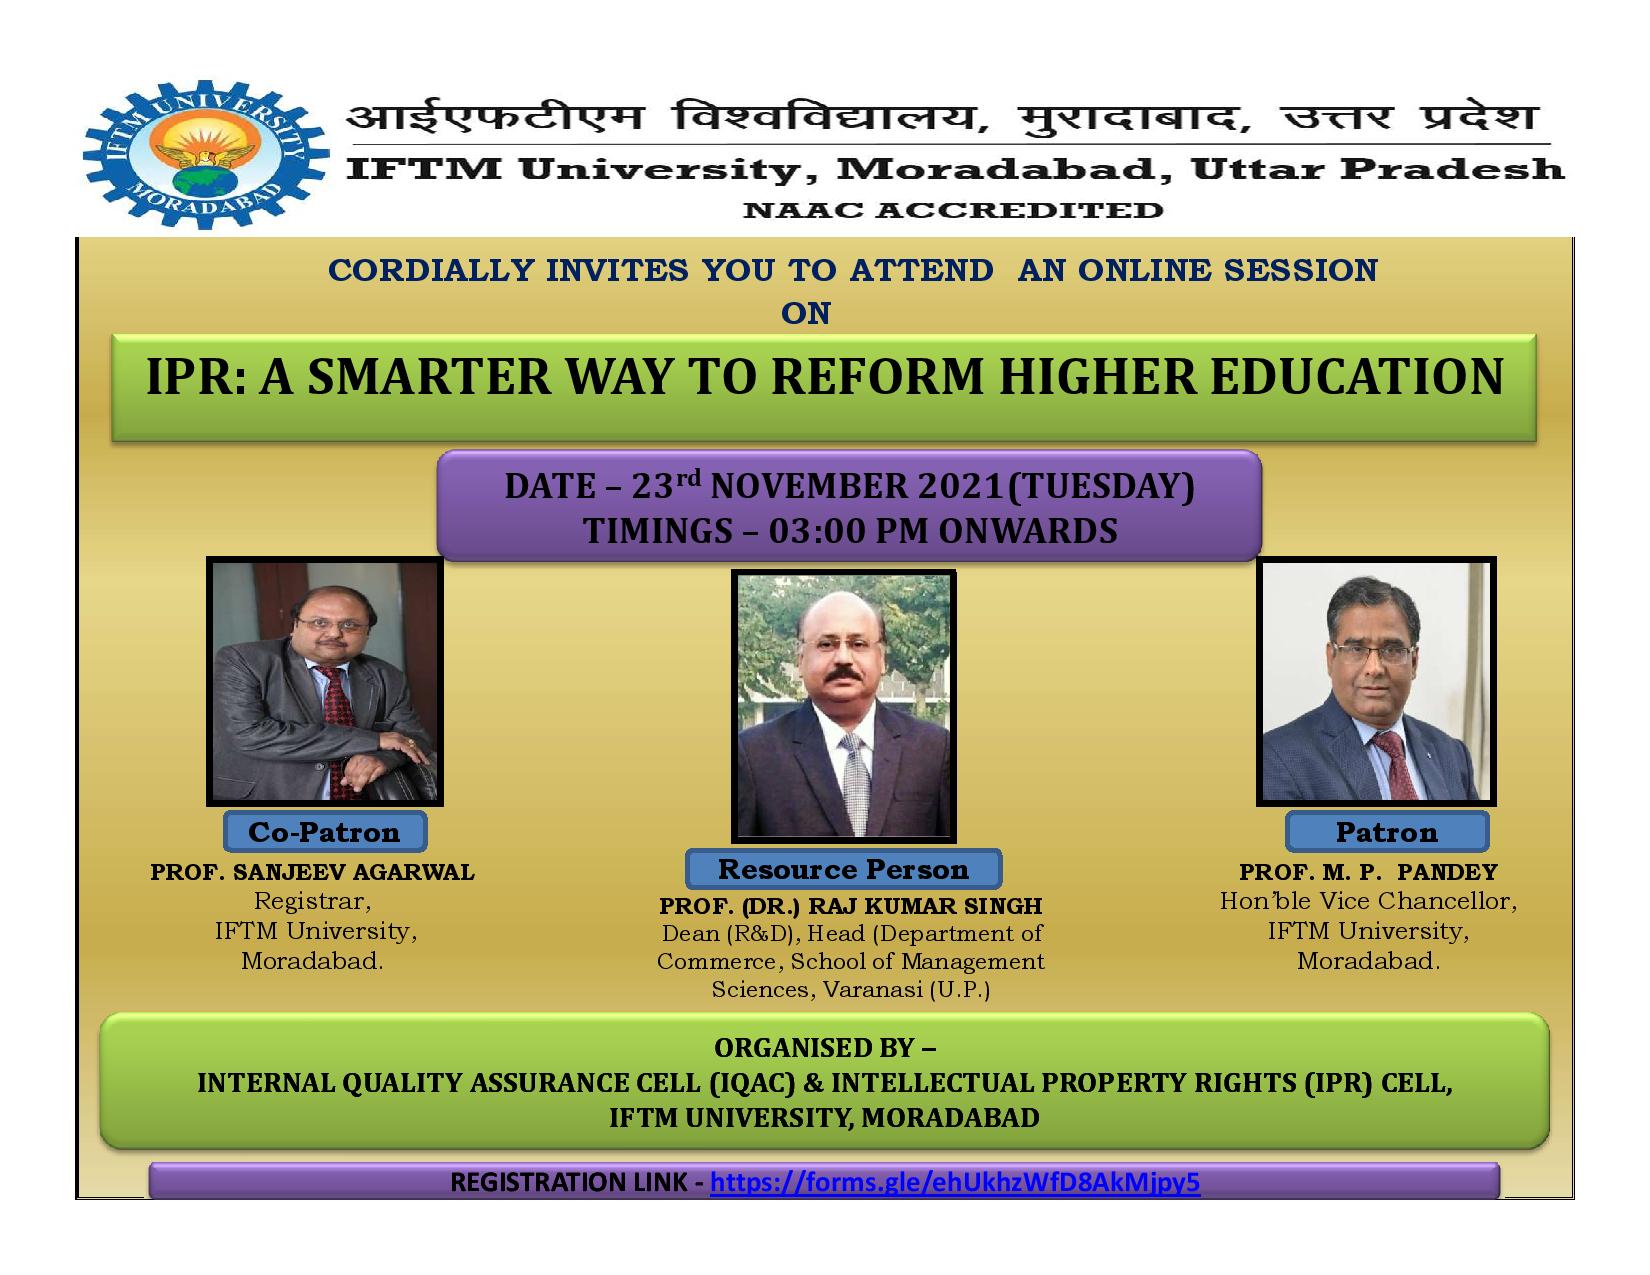 An Online Session on IPR: A Smarter way to reform Higher Education